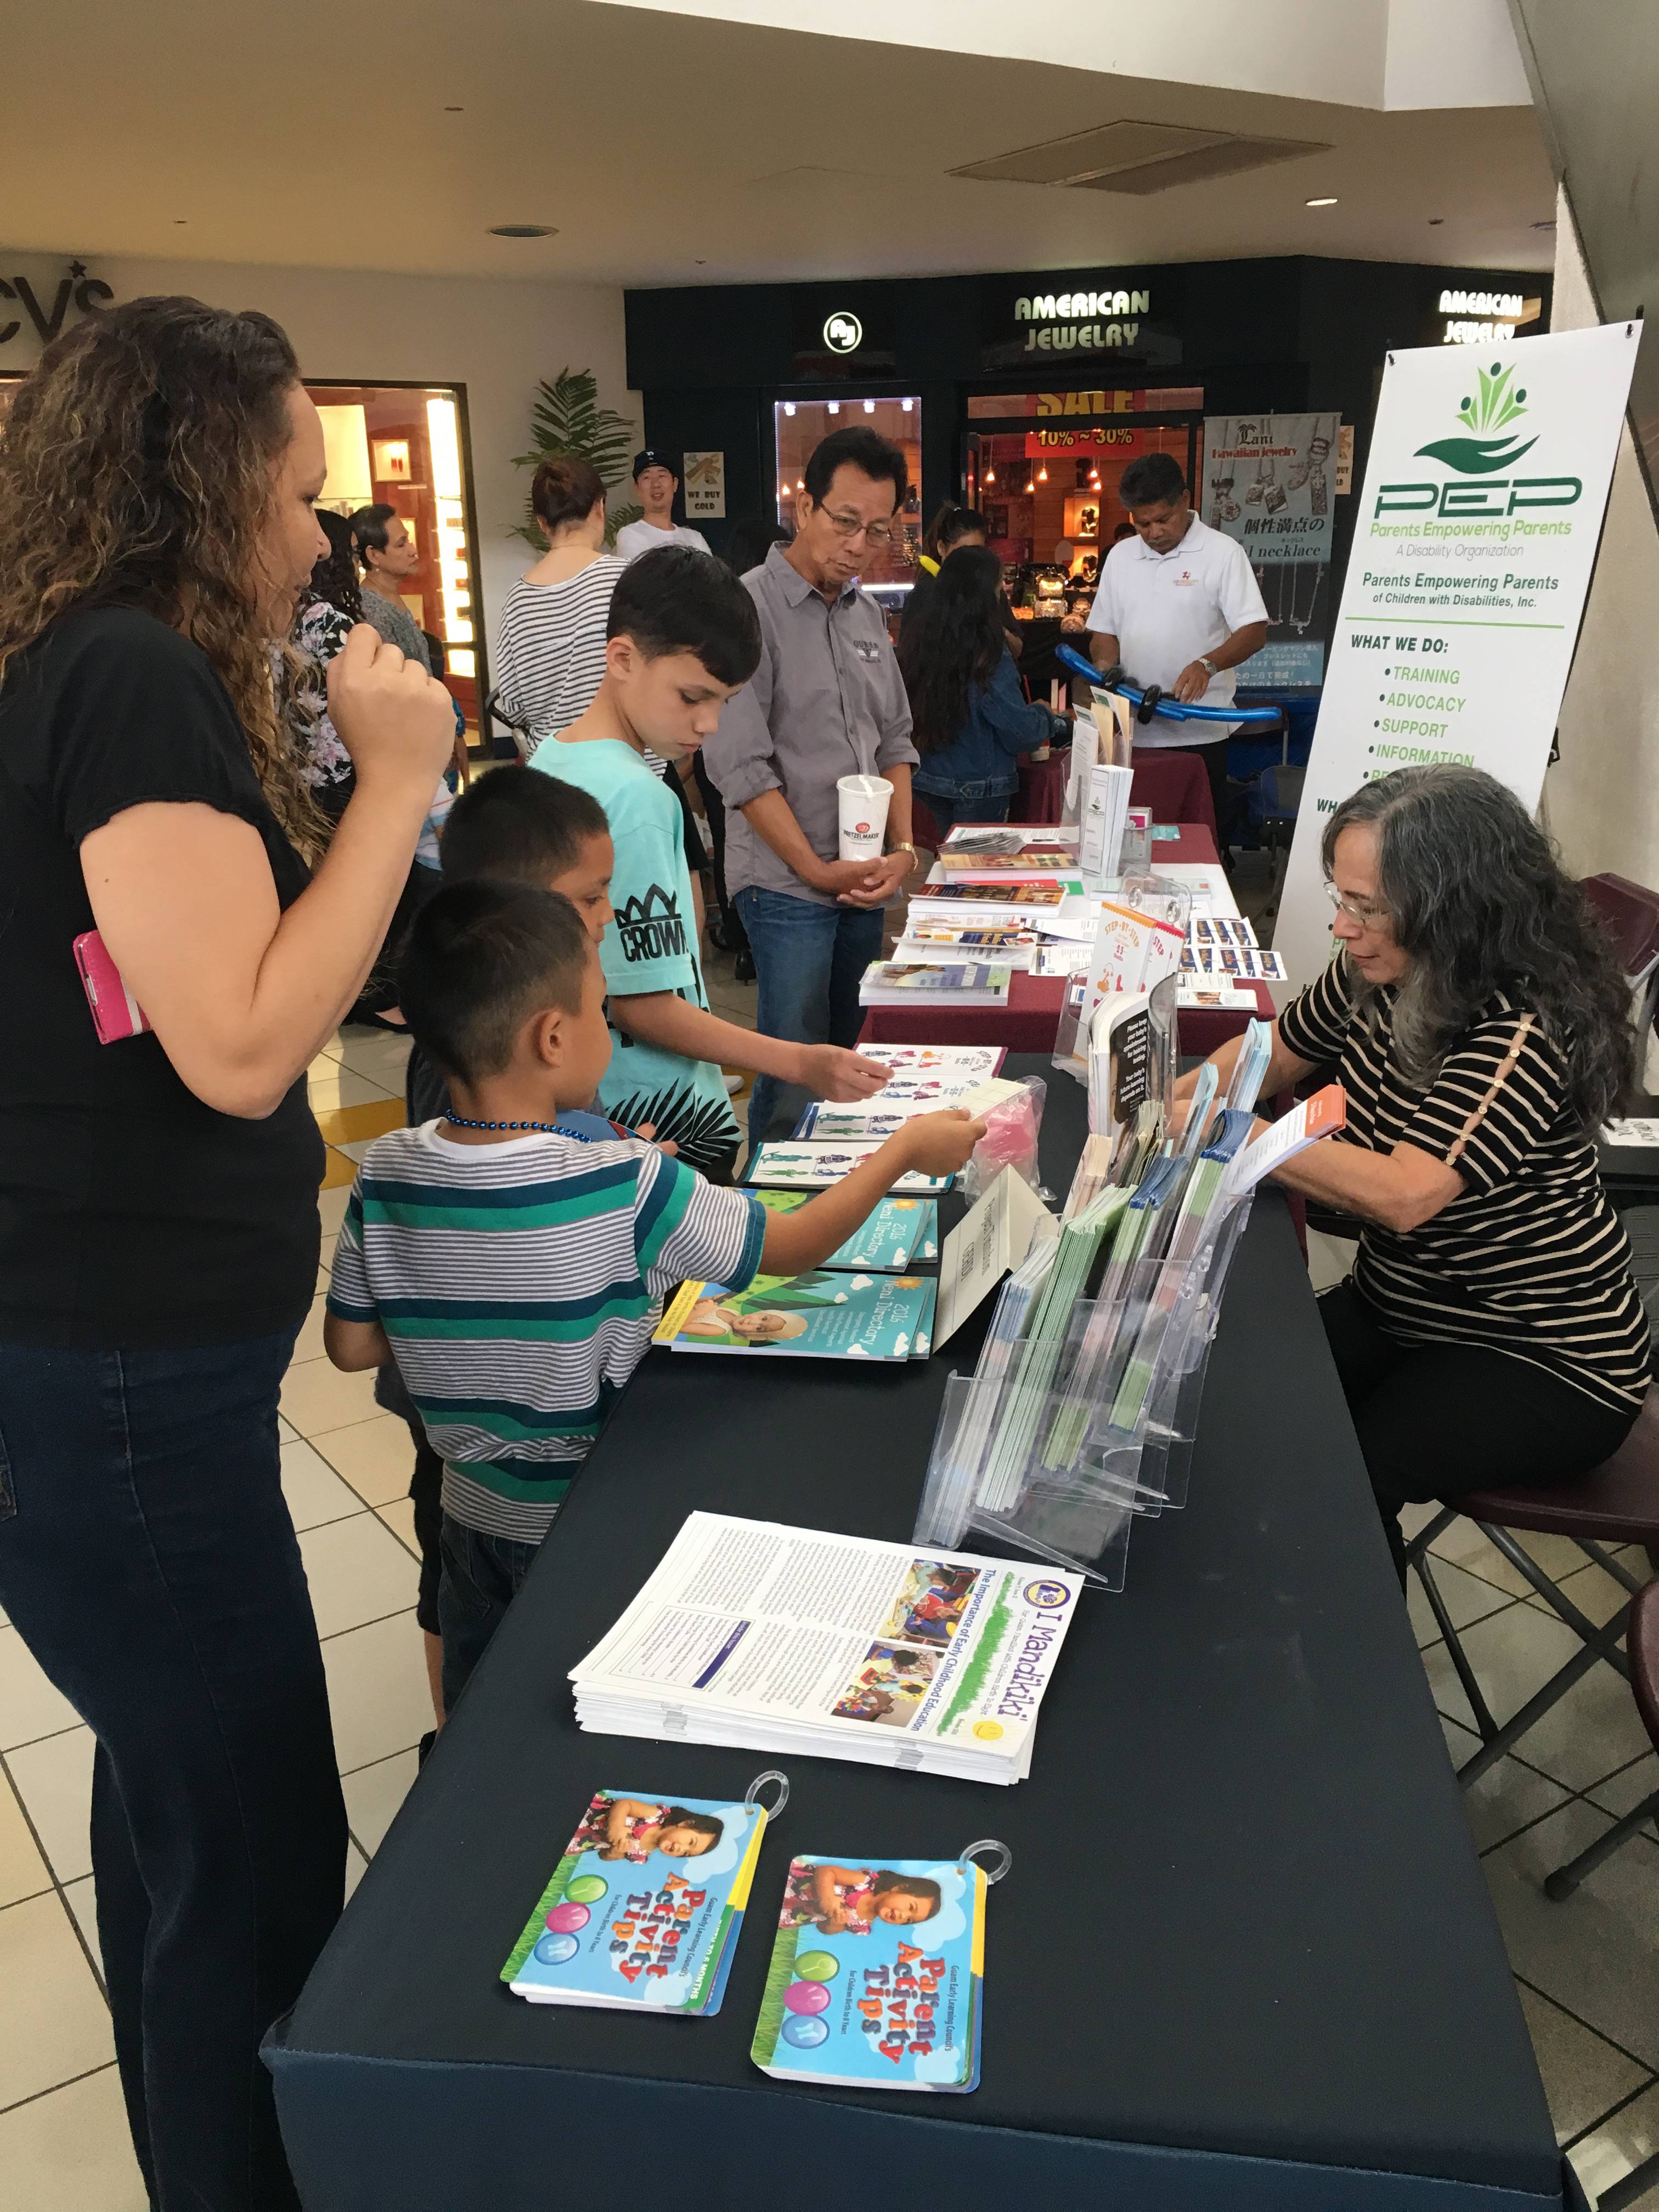 Dawn Guerrero (seated at right), Guam CEDDERS Grant Assistant, responds to questions from participants at the Dental Fair held on Sunday, February 28, 2016 at the Micronesia Mall.  On display and for dissemination were a variety of Guam CEDDERS products including Parent Activity Tip Cards, I Mandikiki' Newsletter, the 2016 Neni Directory of Services, and several brochures on the Guam Early Hearing Detection and Intervention (Guam EHDI) program and information that promotes the importance of Early Childhood Development and developmental screening.